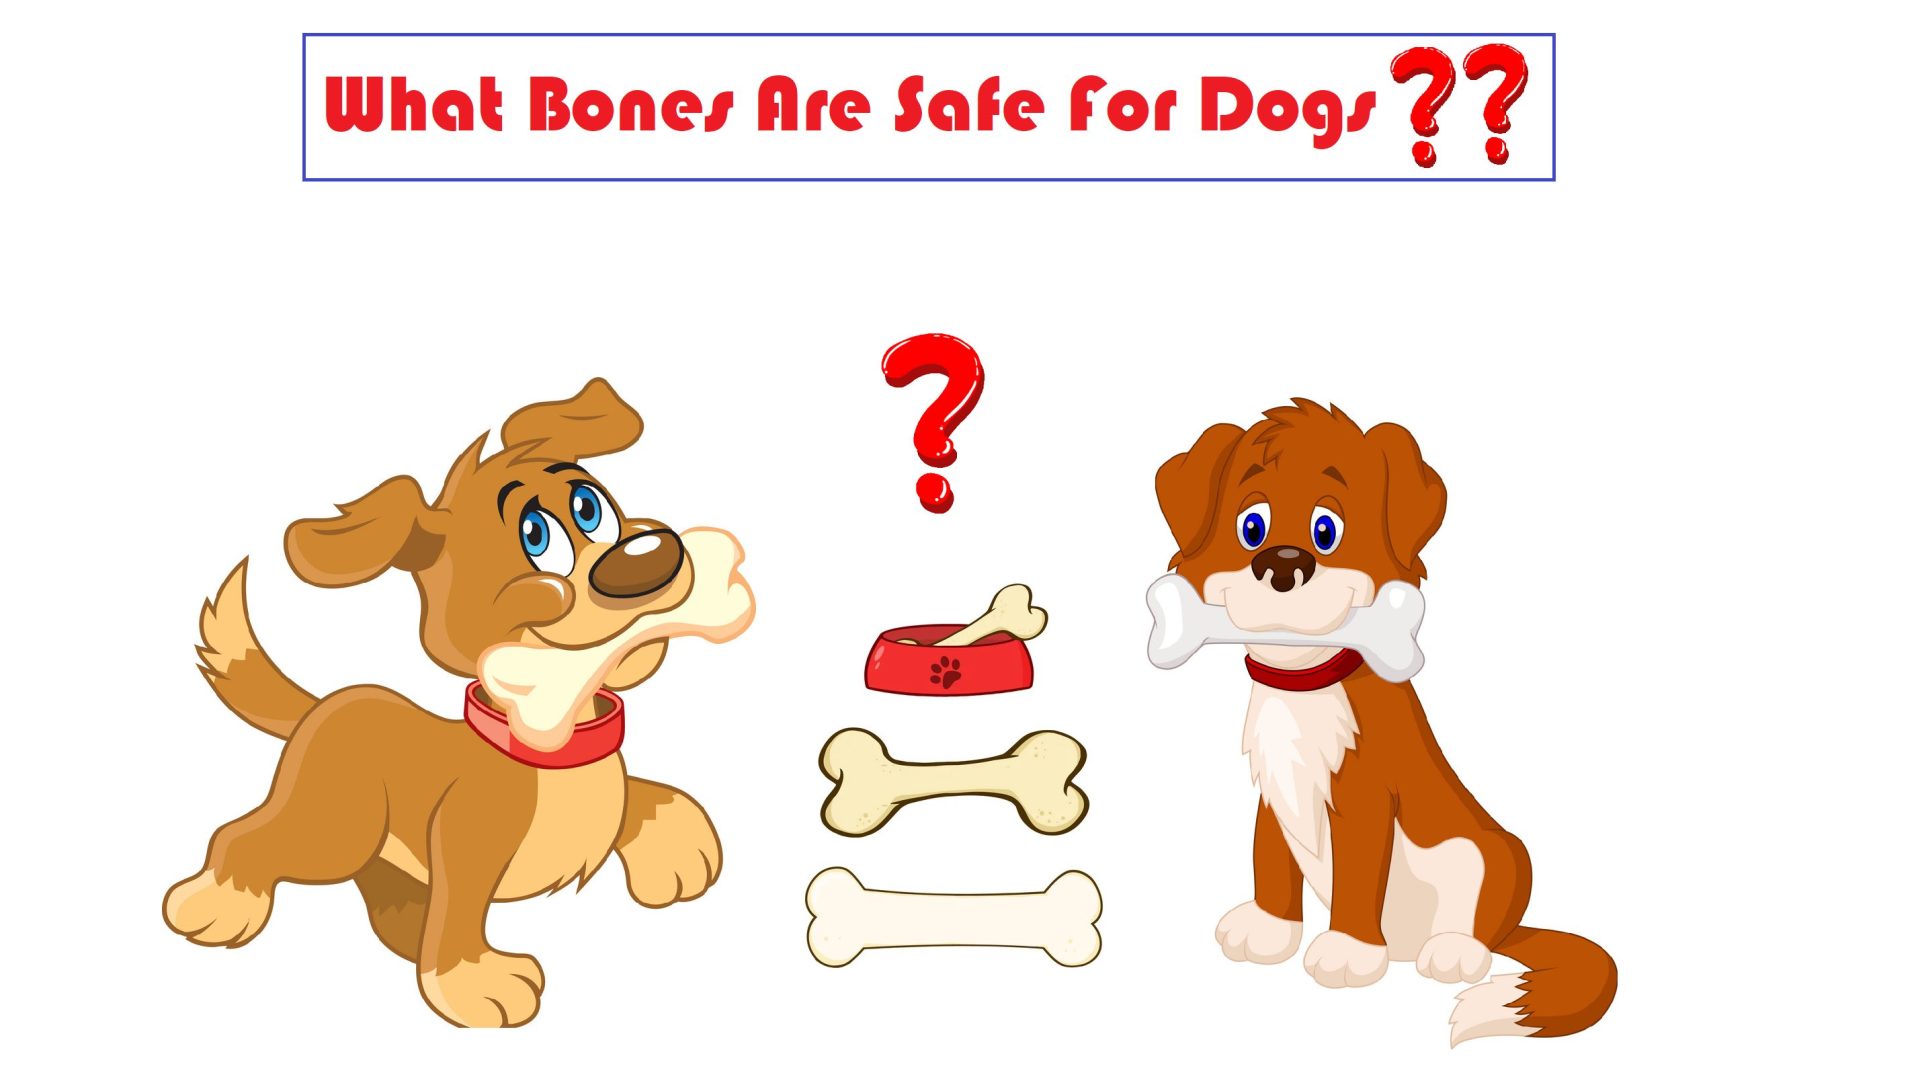 What Bones Are Safe For Dogs?